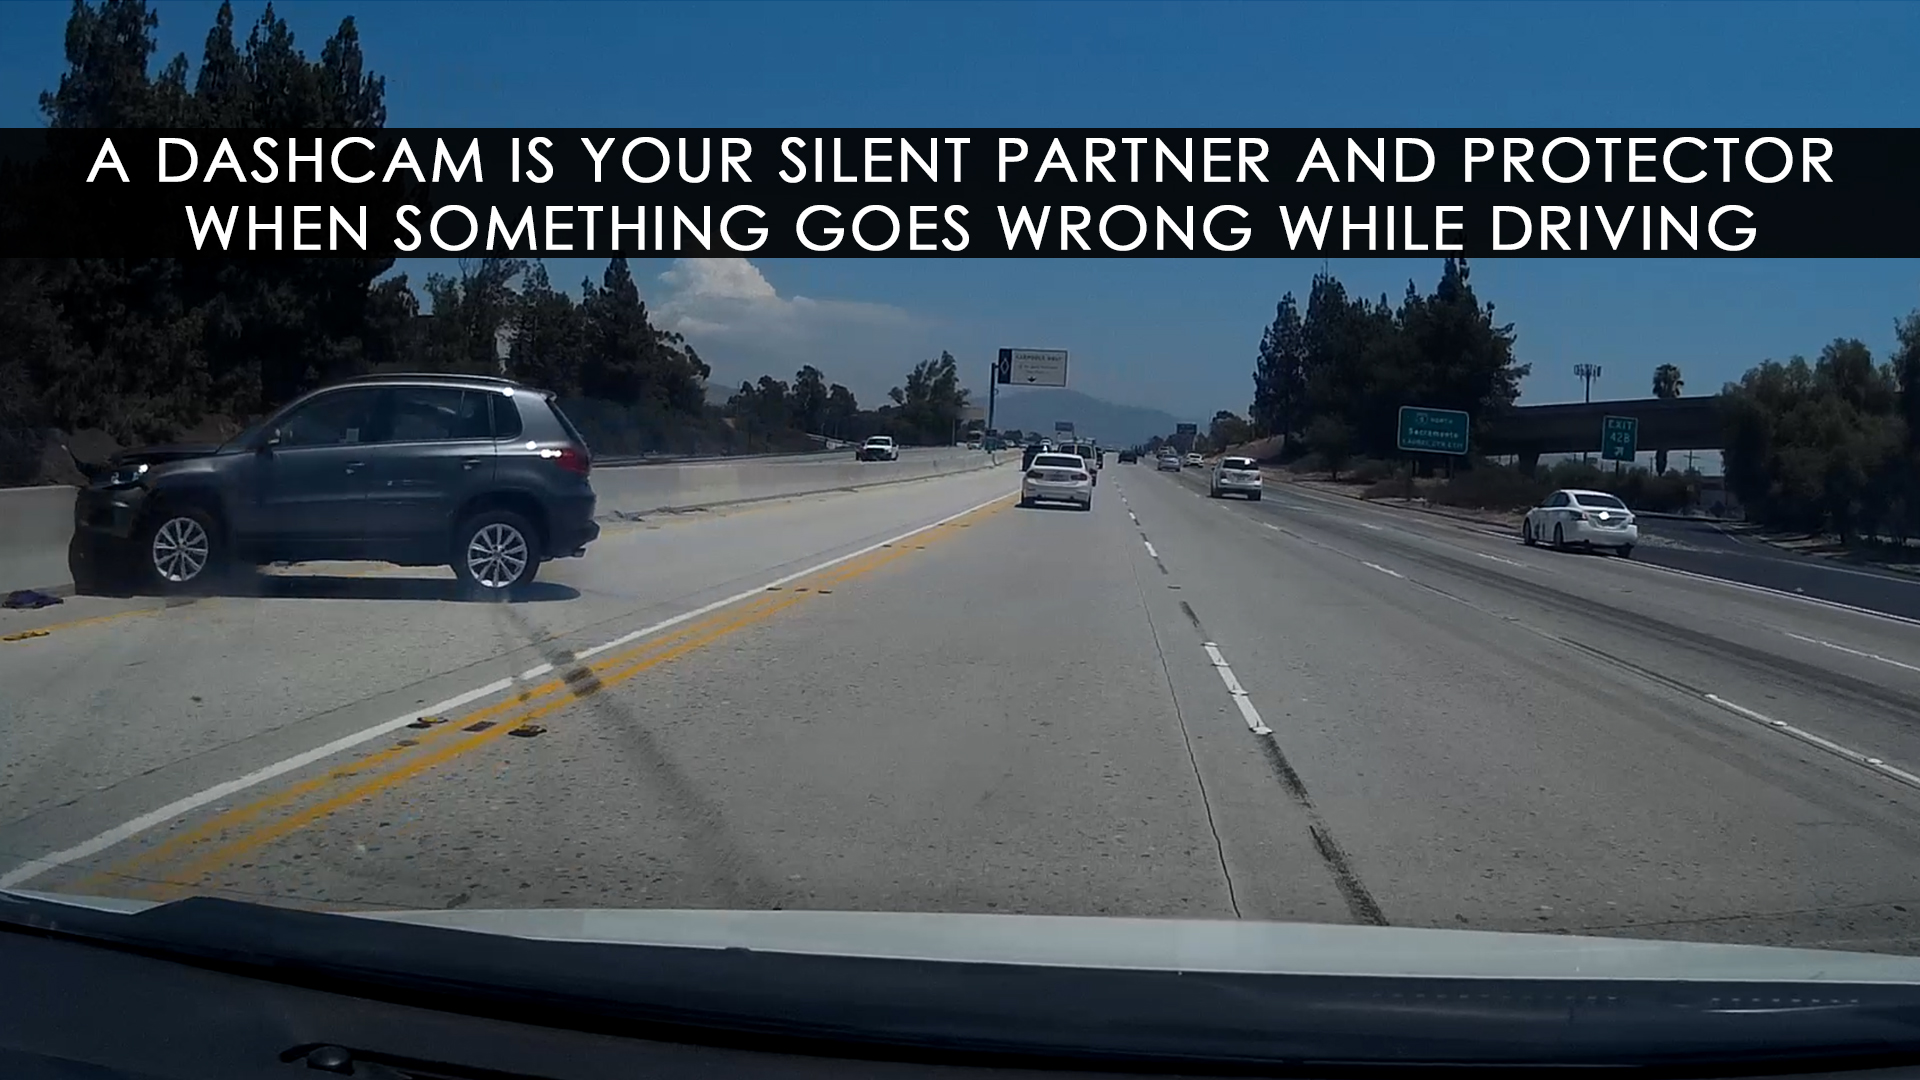 A Dashcam is Your Silent Partner and Protector